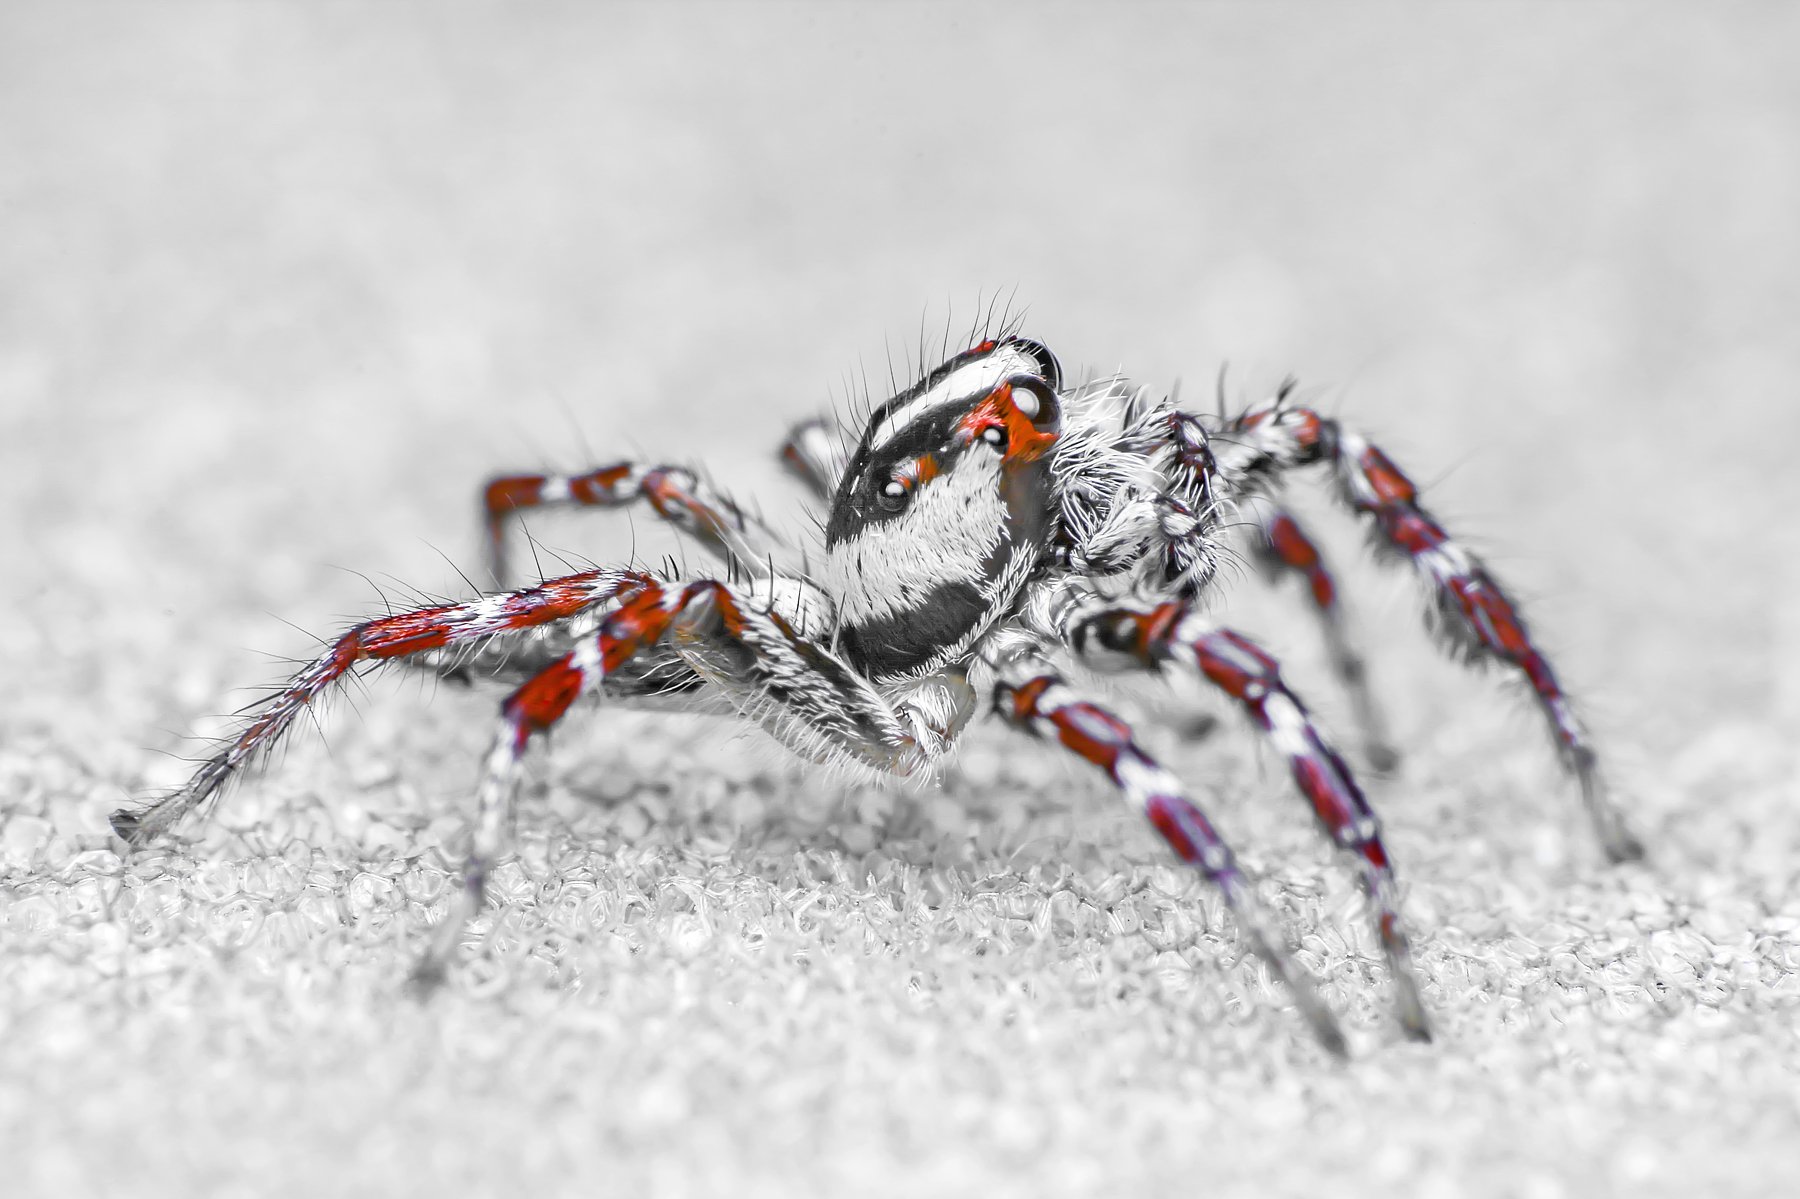 spider, insect animal, danger, dangerus, beatiful, beauty, tropical, eyes, small, macro, close up, jumpon leaf, park, outdoor, forest prey, wild, wildlife, snow, snowy, white, red, nature, natural, garden, NeCoTi ChonTin